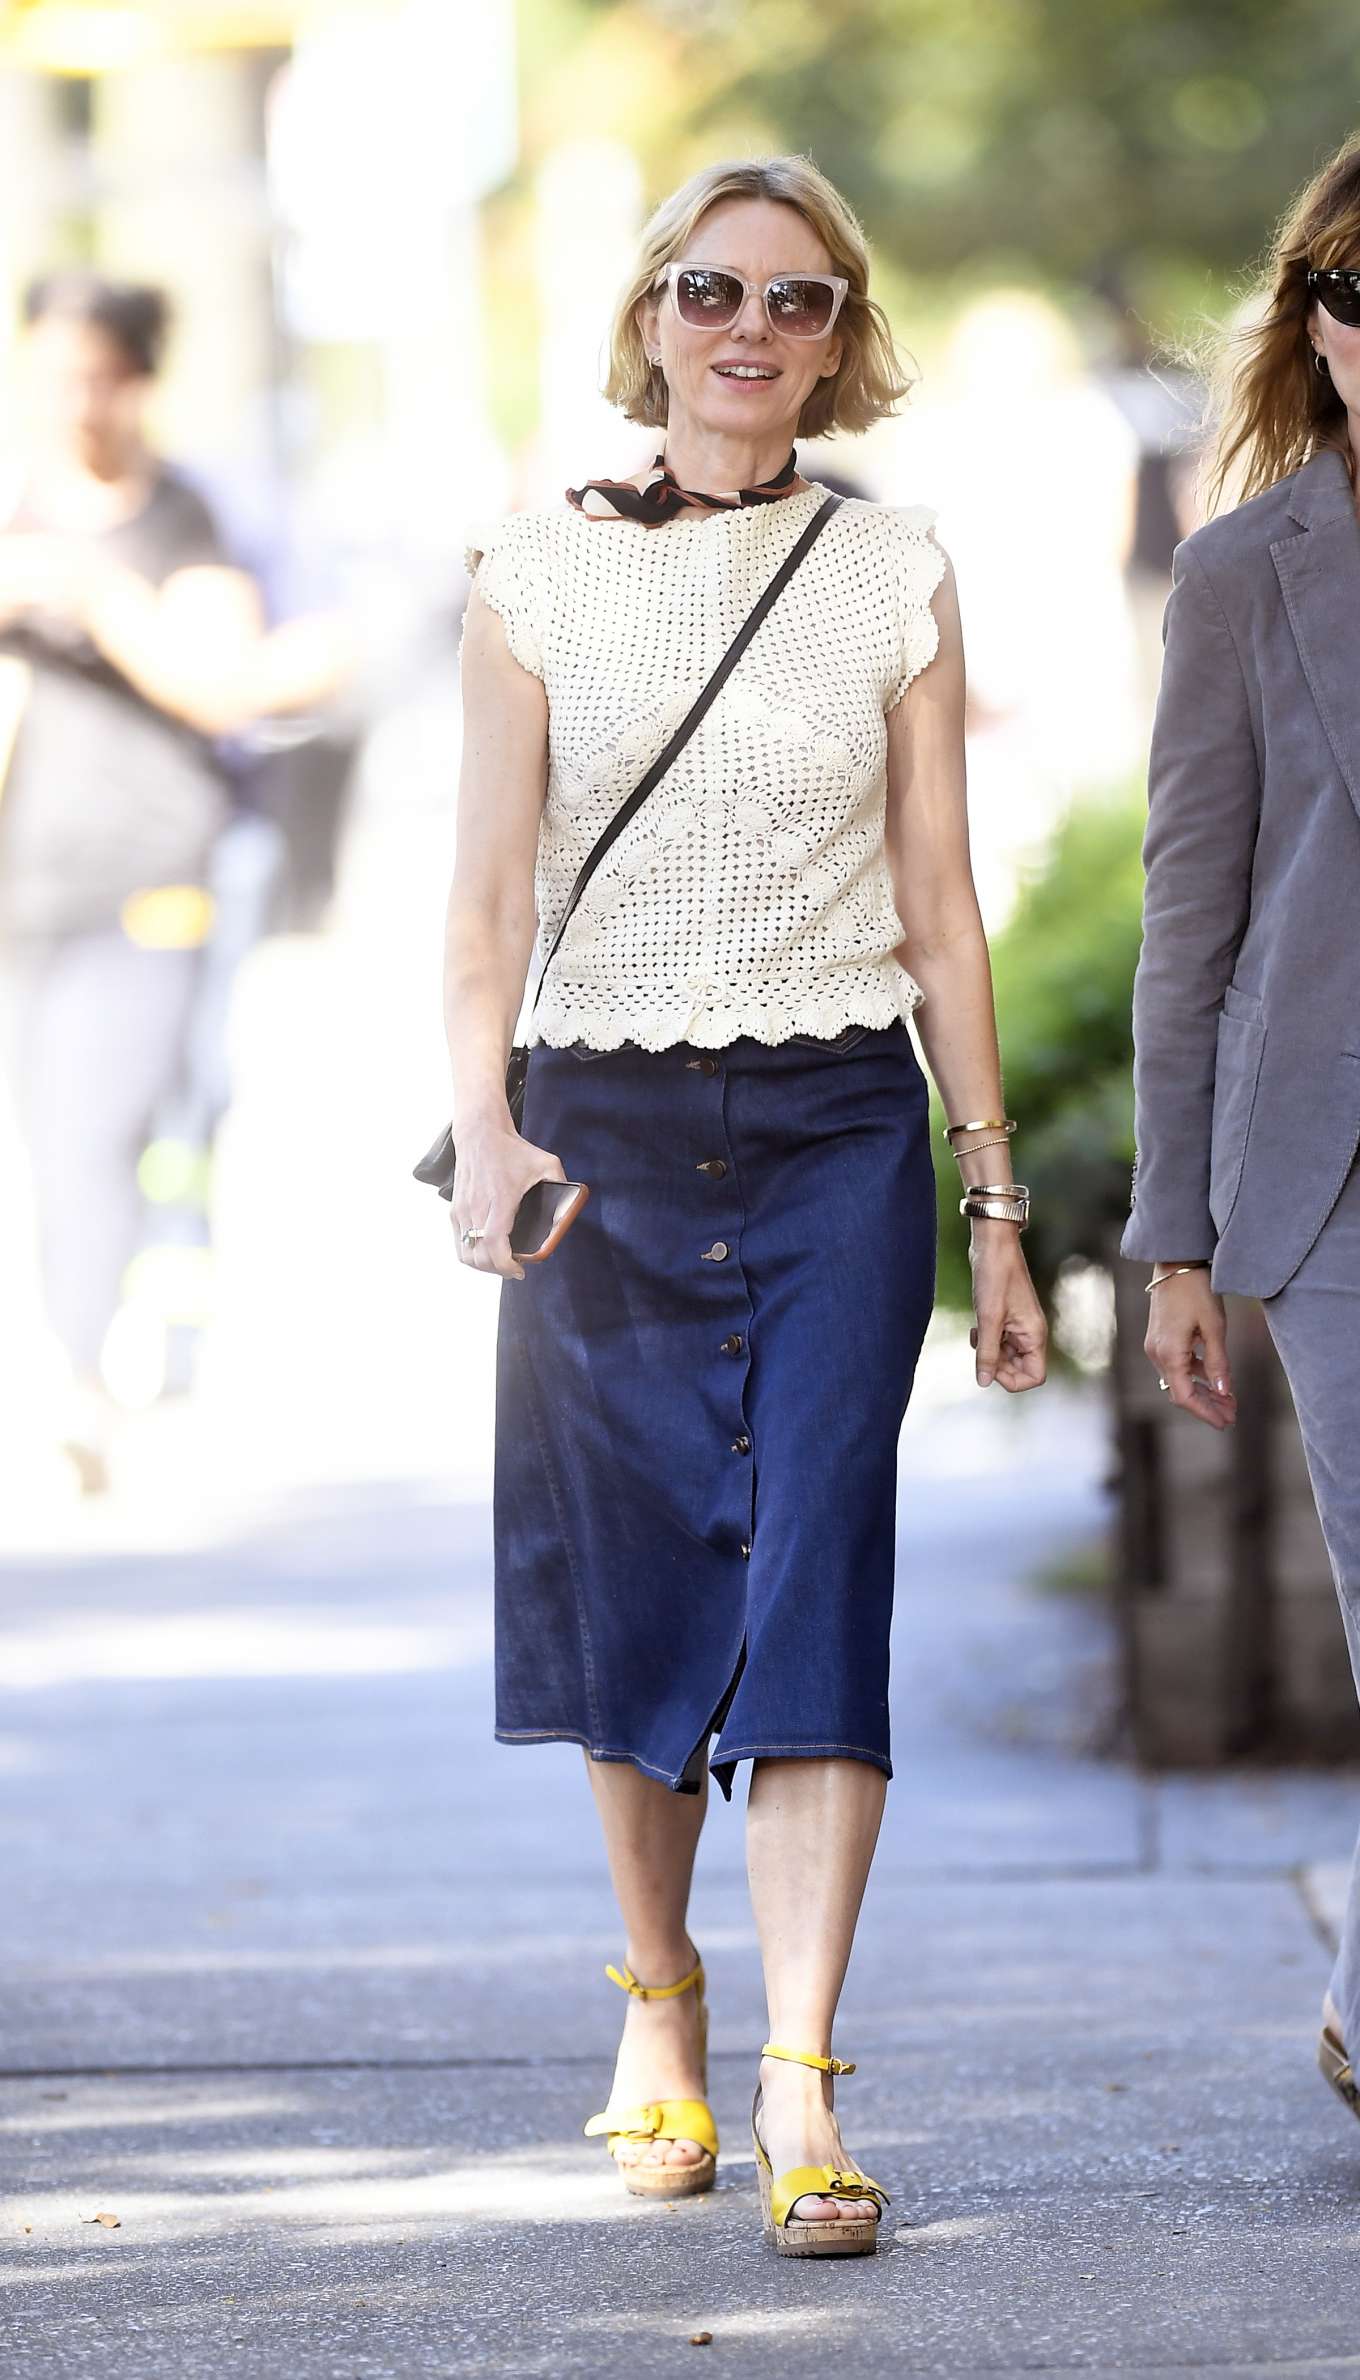 Naomi Watts in Denim Skirt - Out in New York